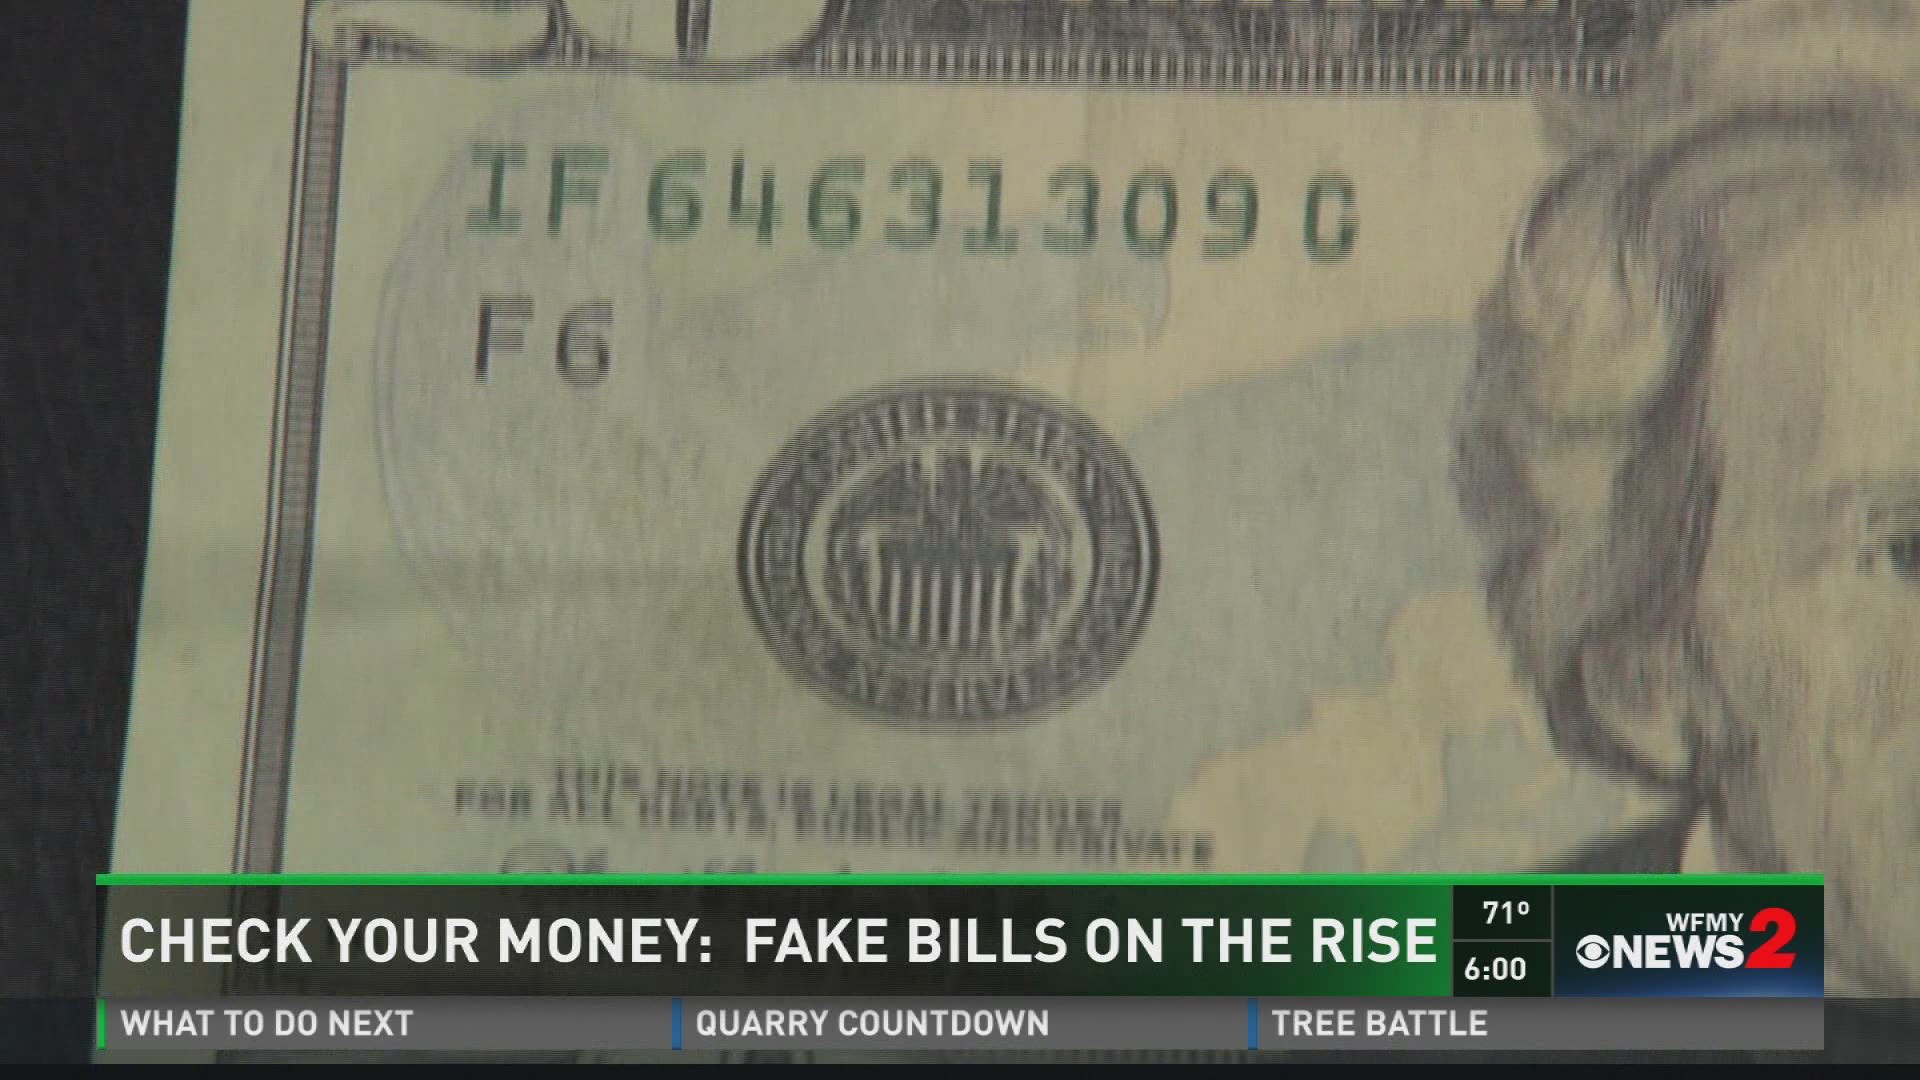 3 Things To Know When It Comes To Spotting Fake Cash